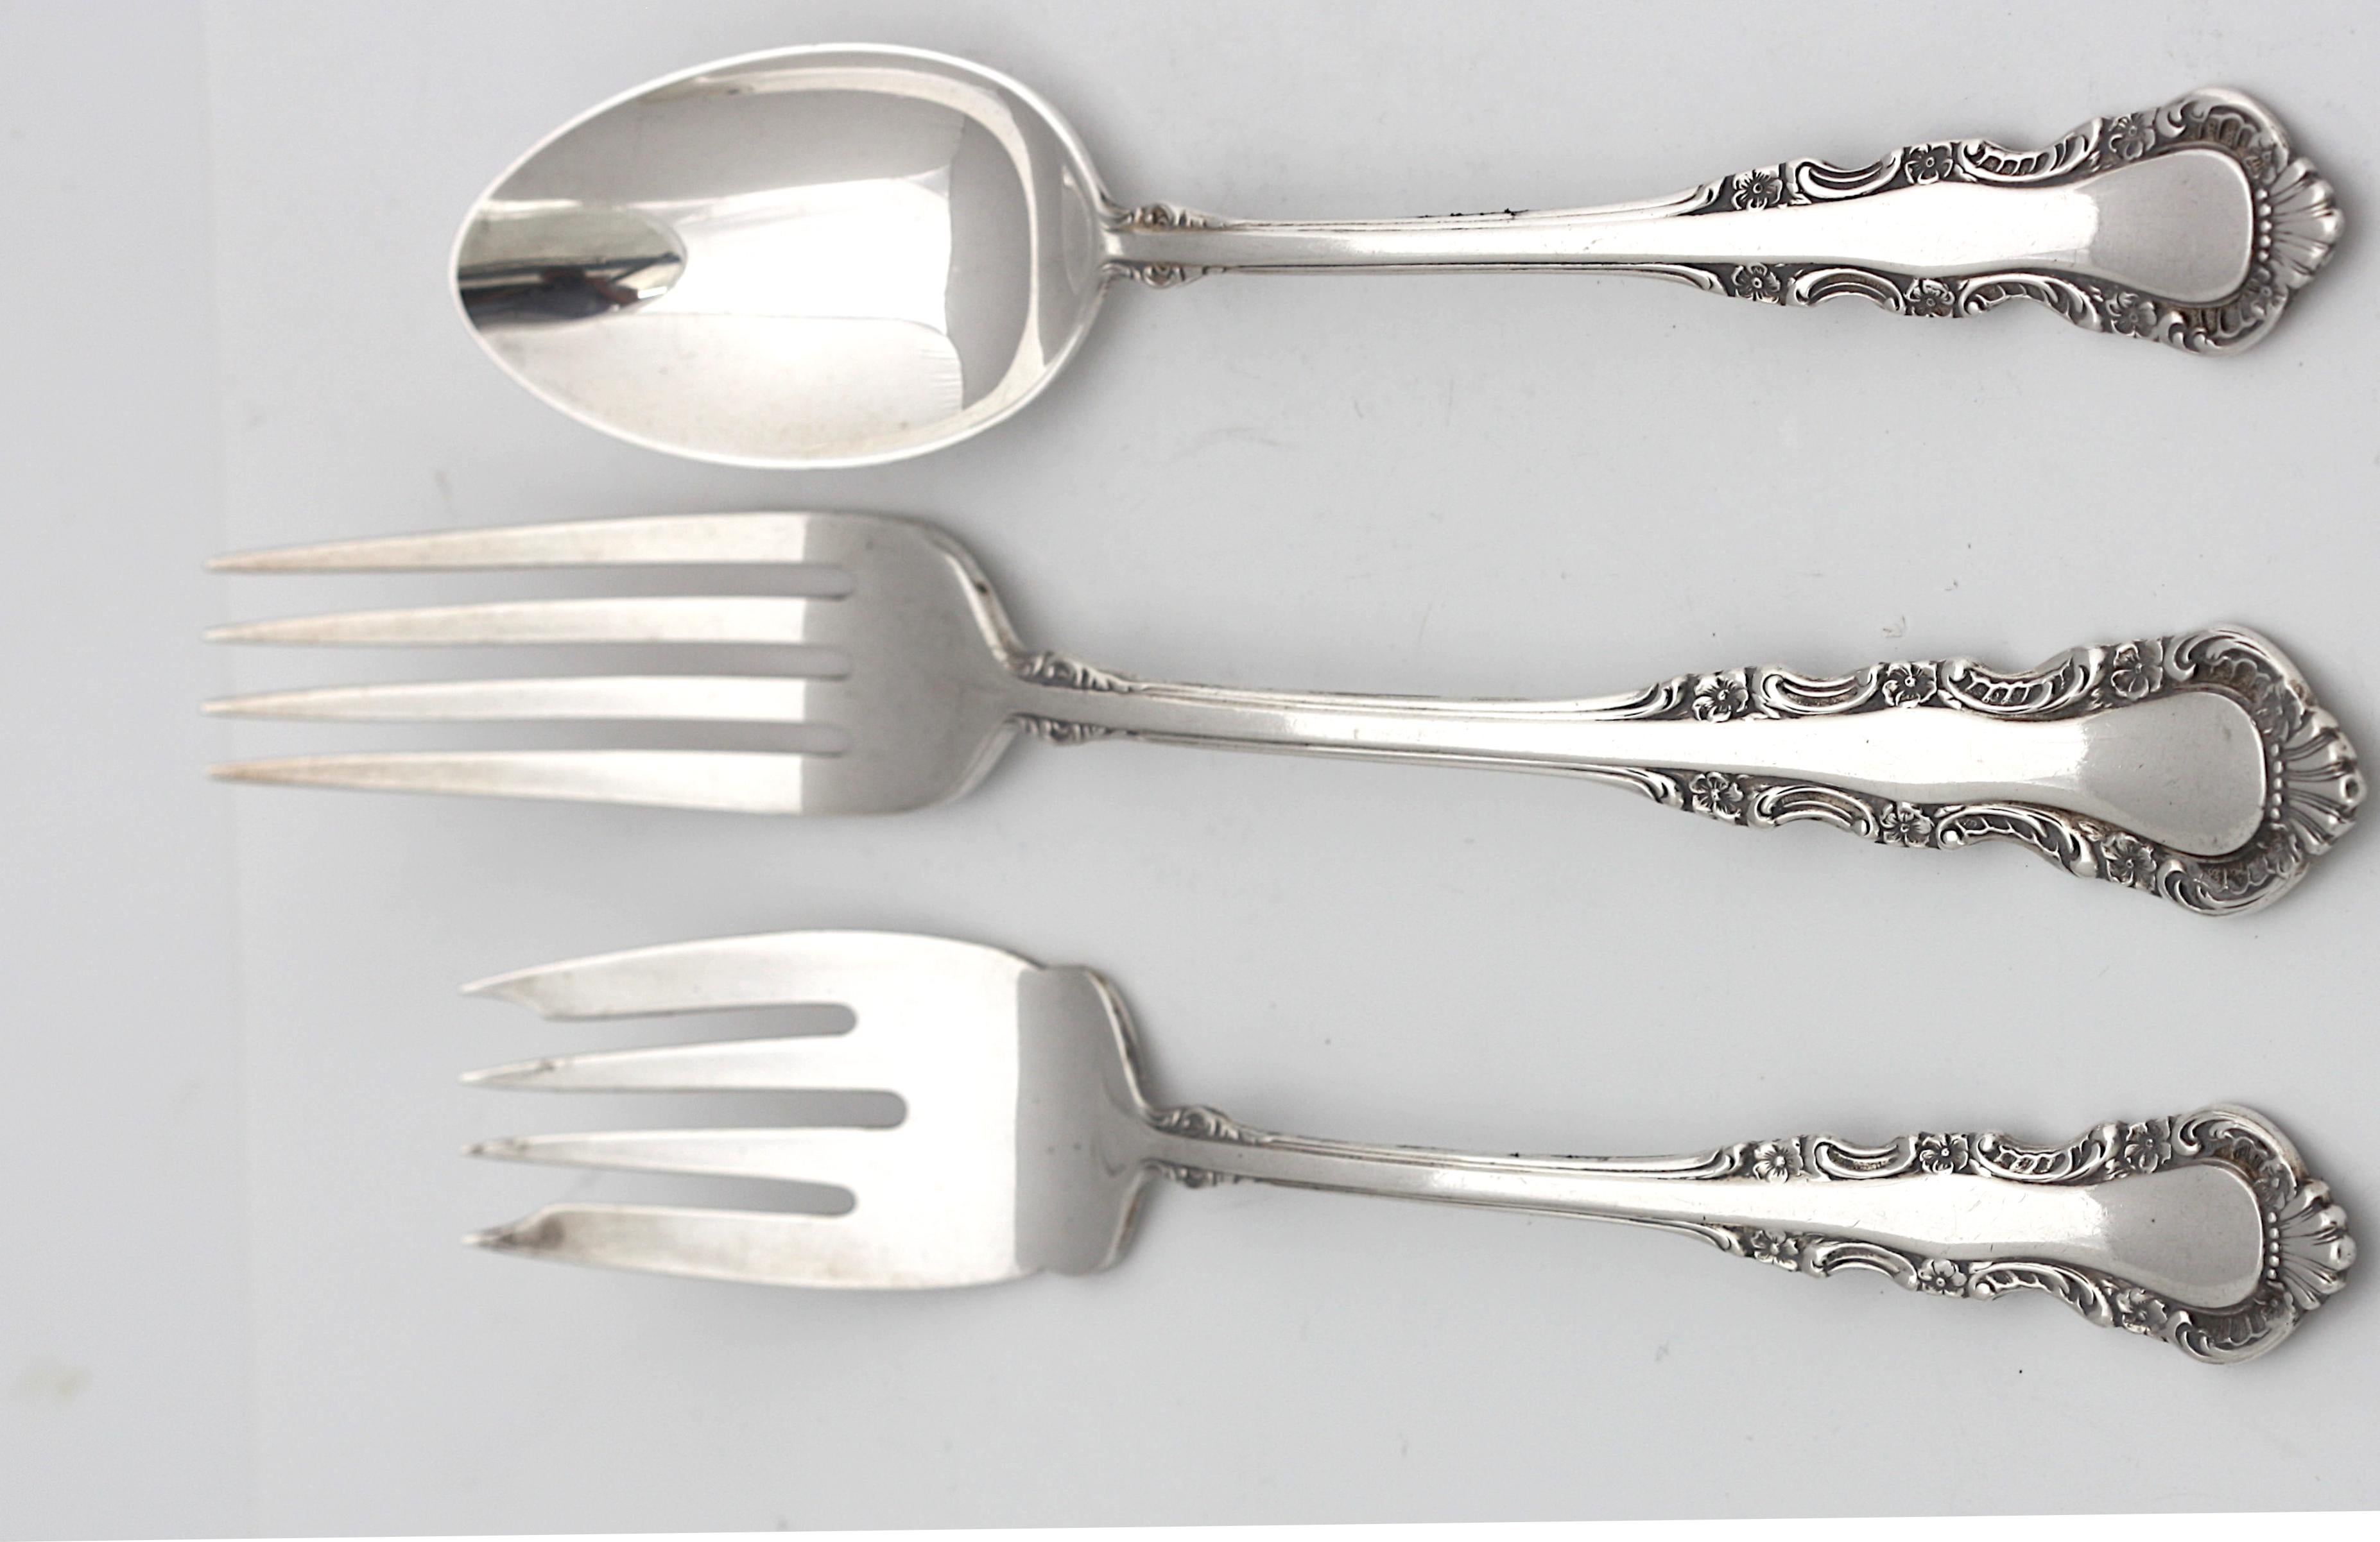  Reed & Barton Sterling Silver Fifty-Nine Piece Flatware Service  For Sale 2